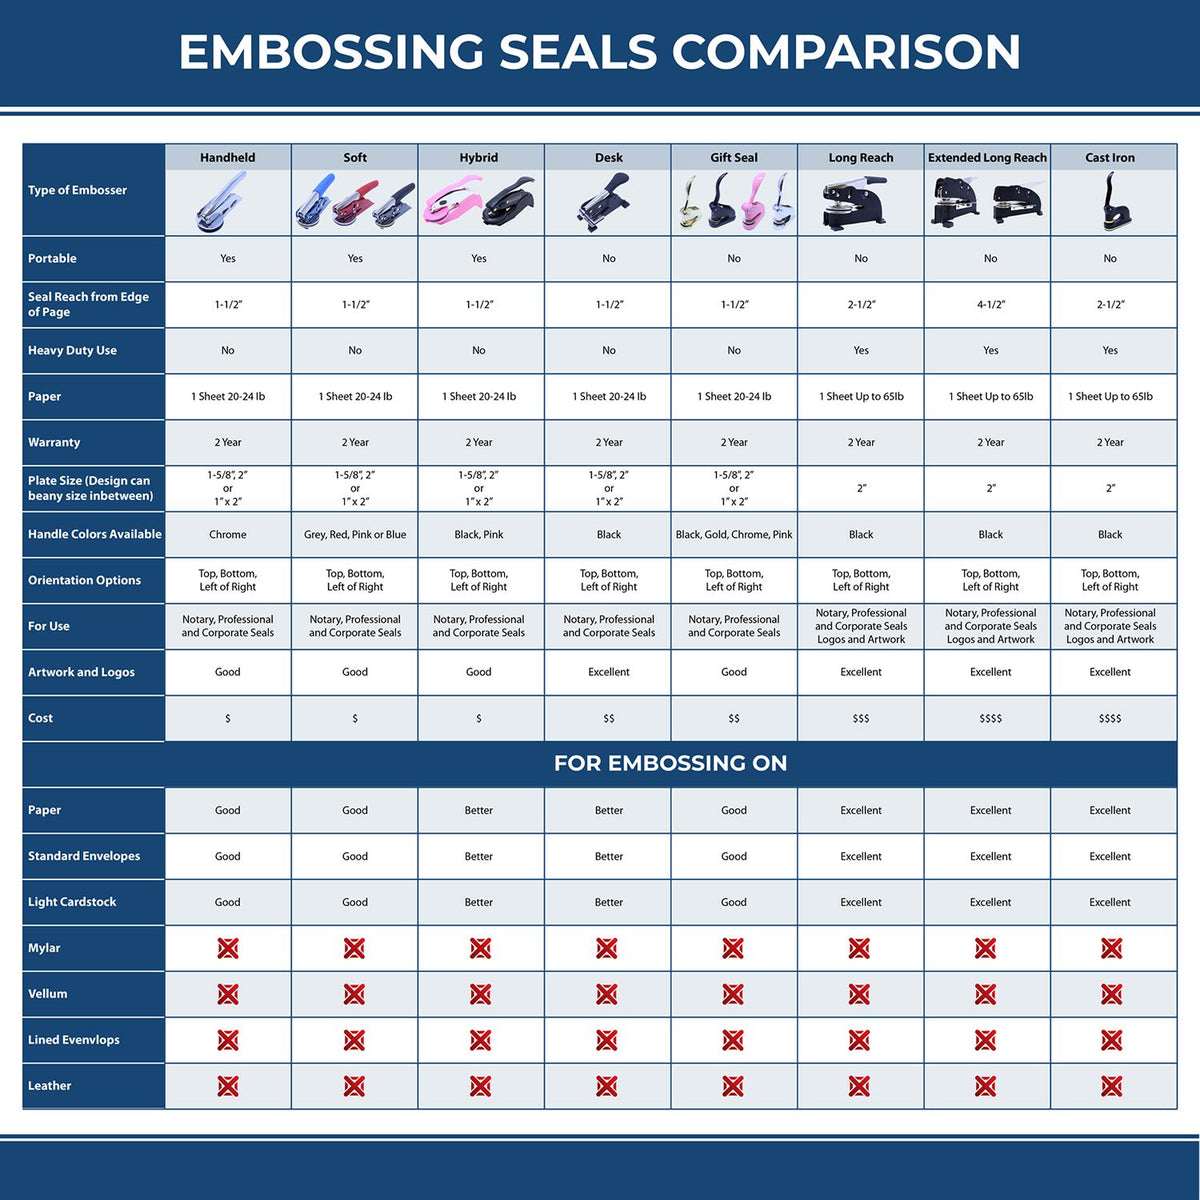 A comparison chart for the different types of mount models available for the Heavy Duty Cast Iron Maine Engineer Seal Embosser.